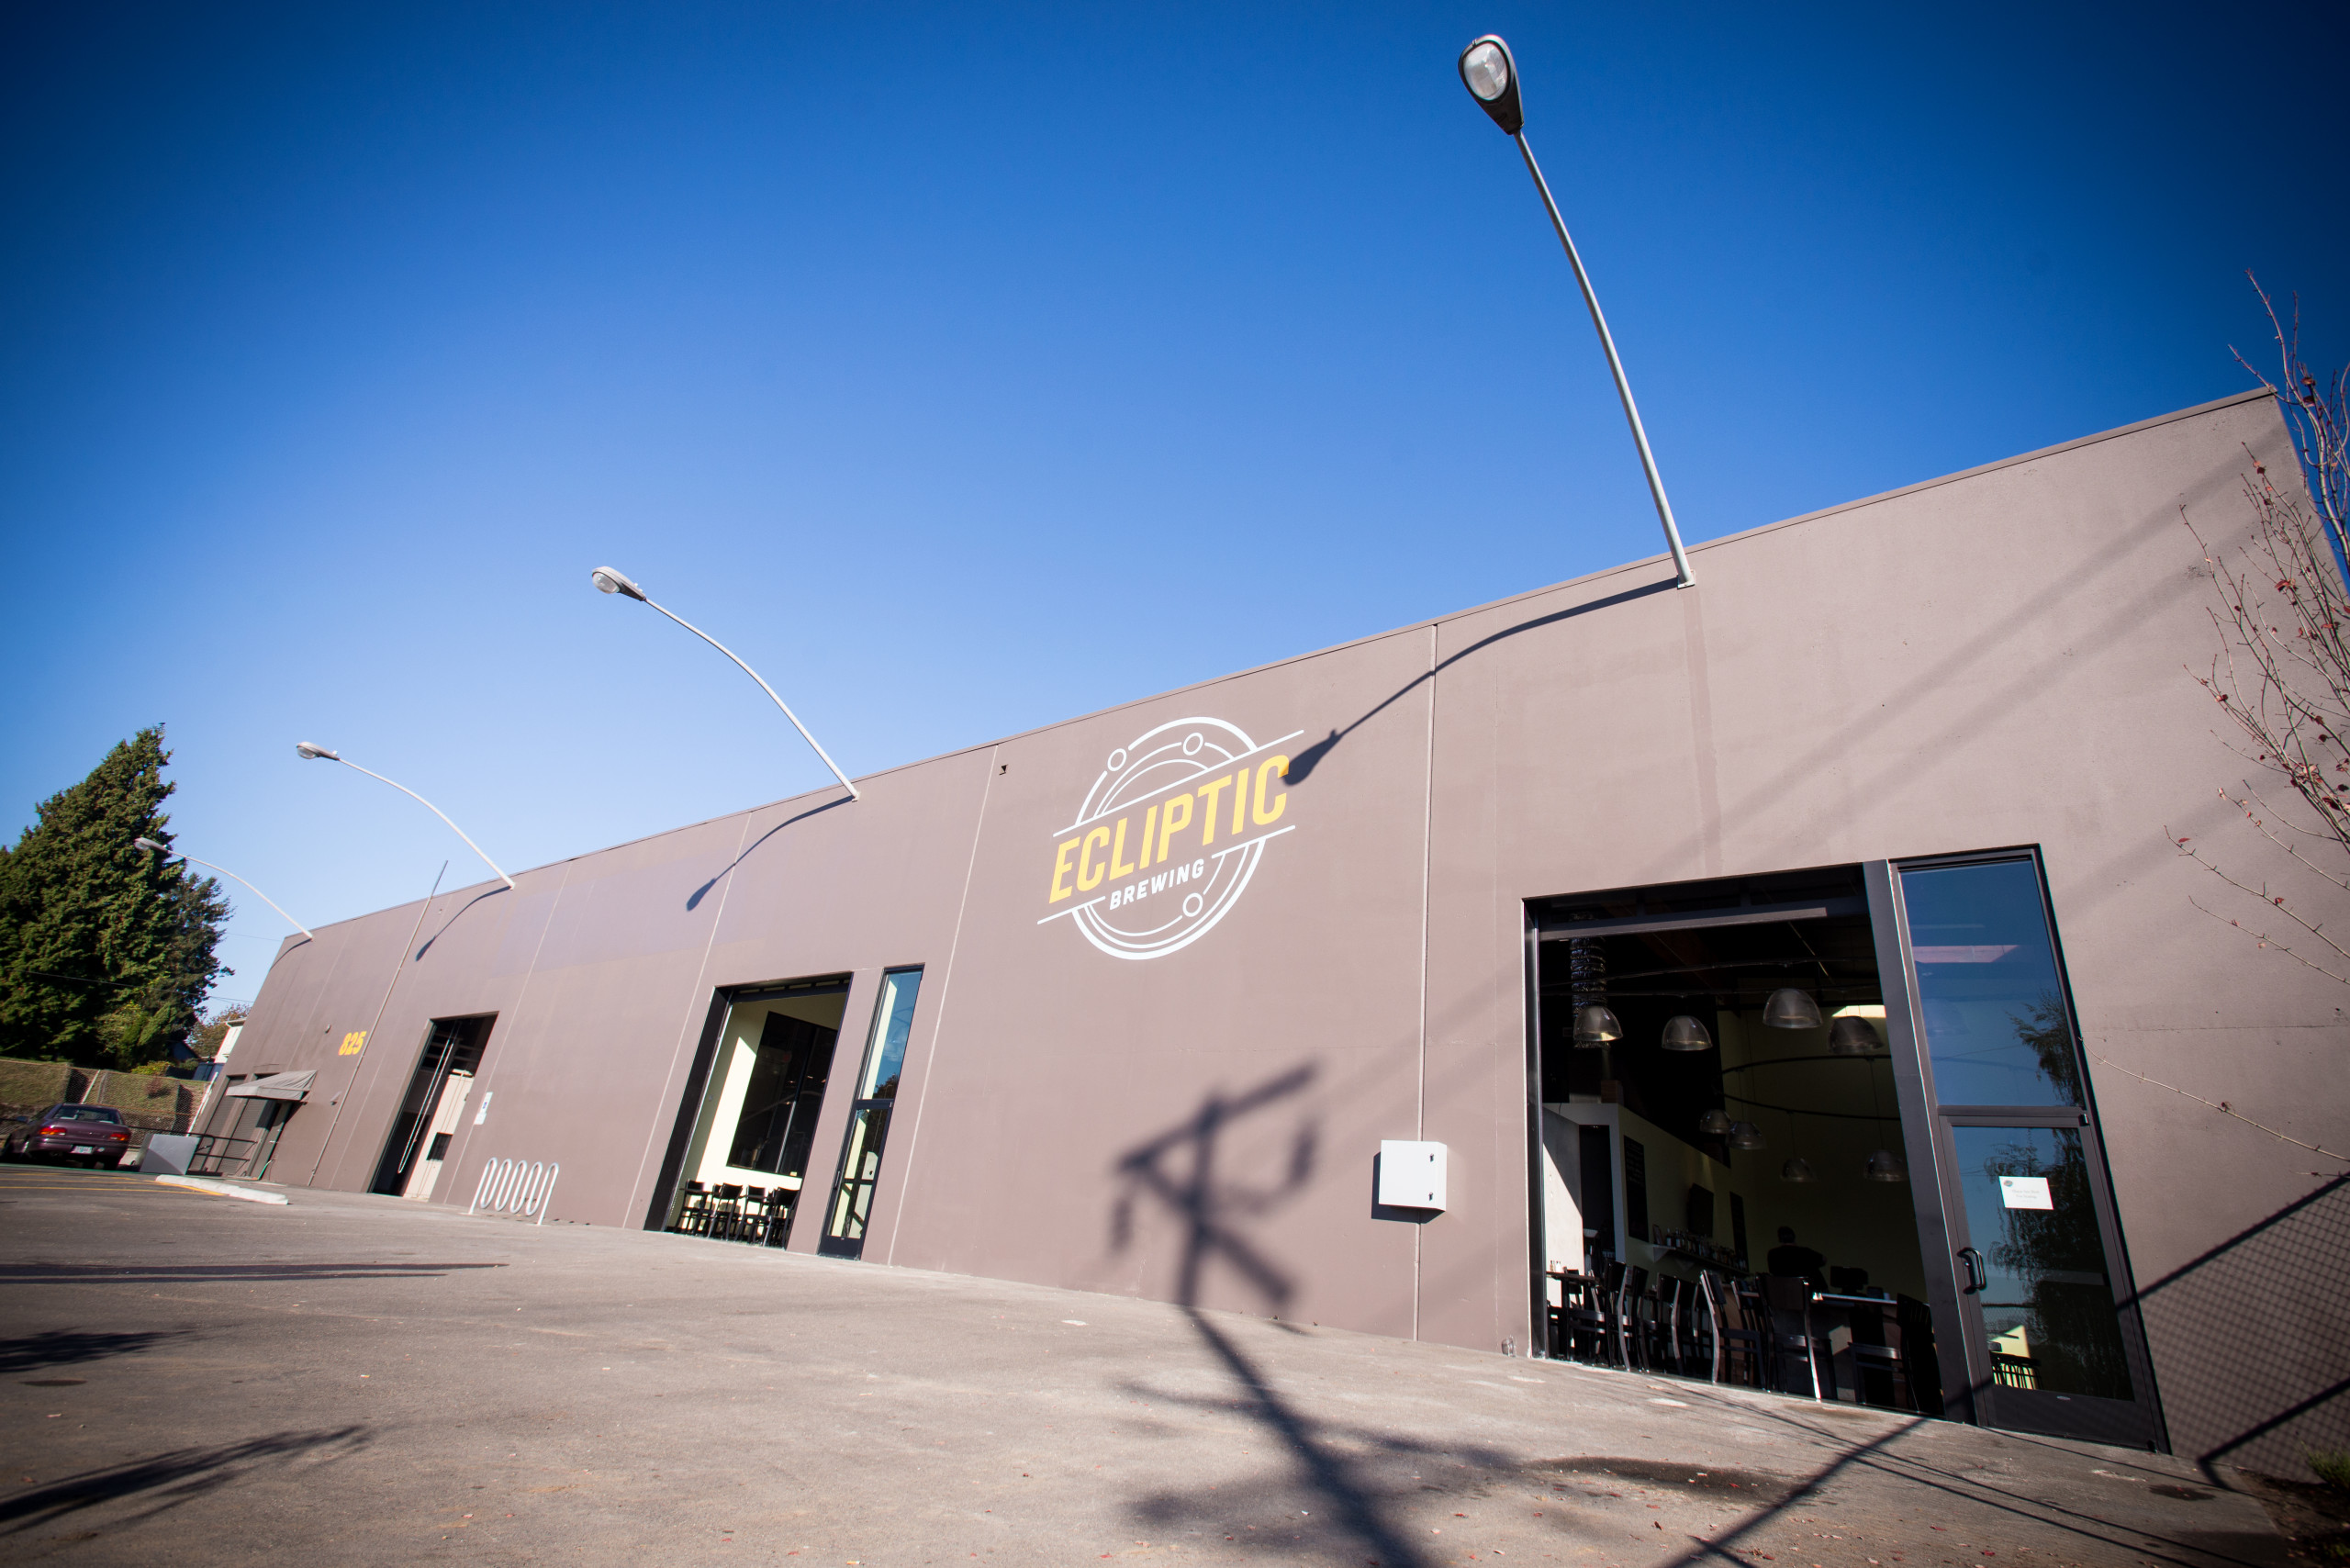 Ecliptic Brewery